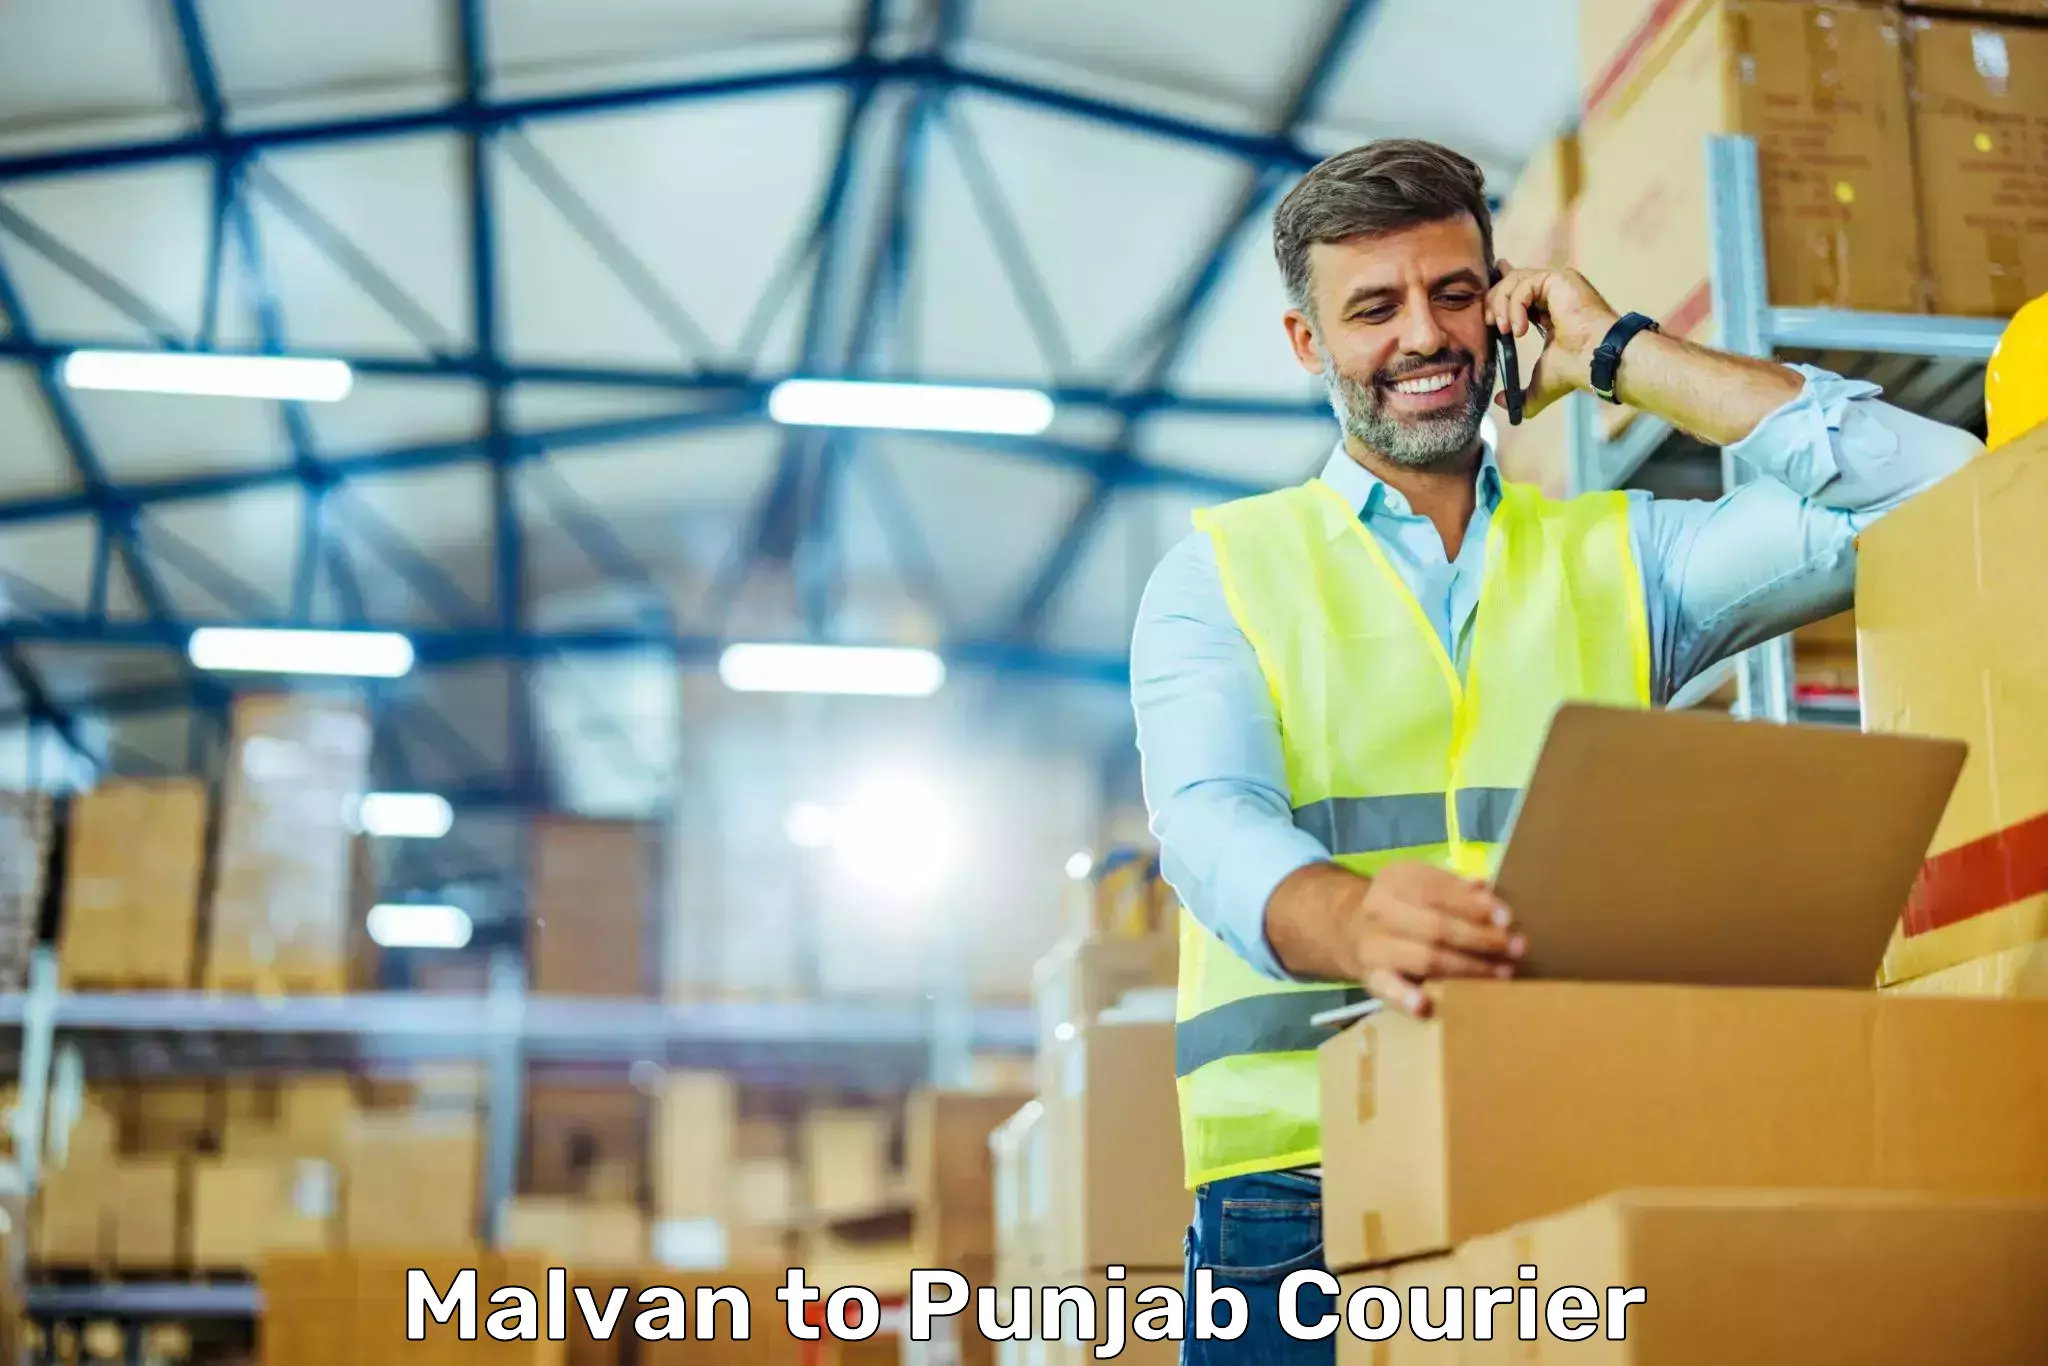 Express delivery network Malvan to Punjab